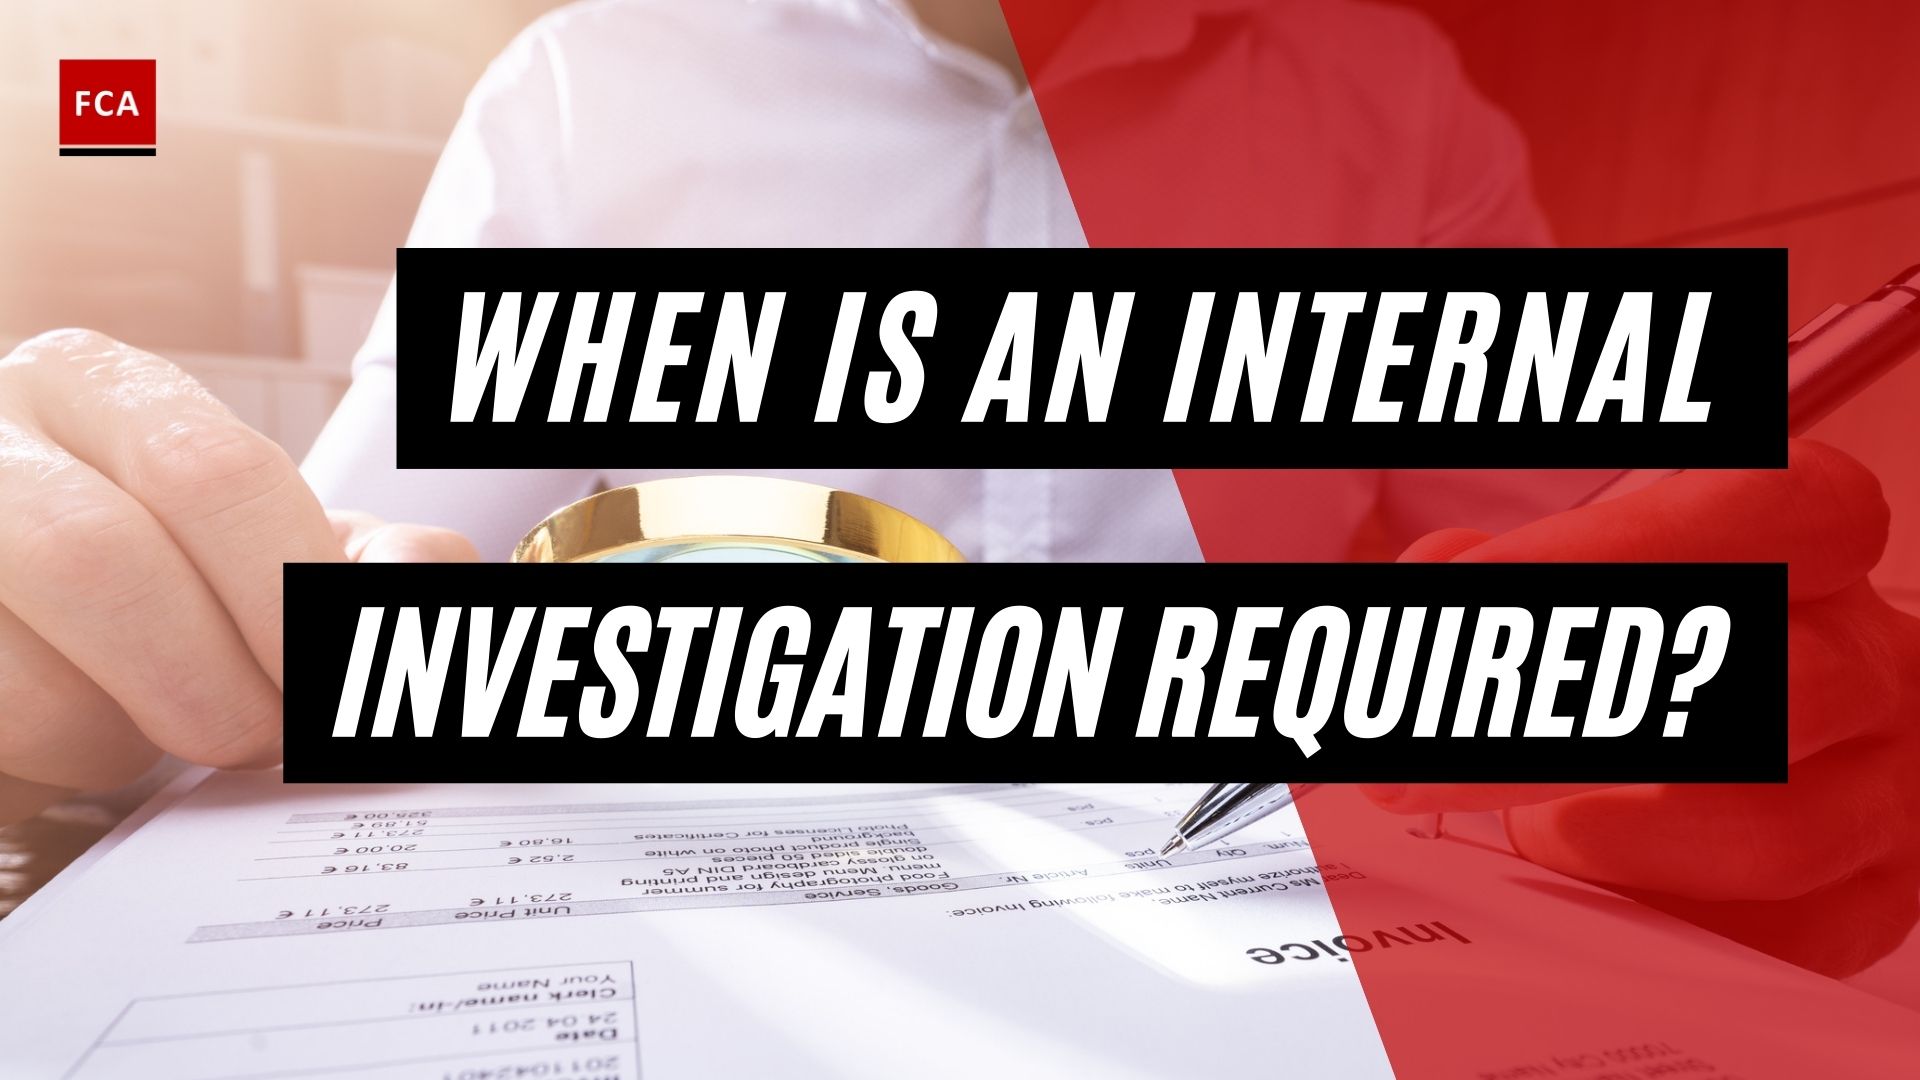 When Is An Internal Investigation Required?